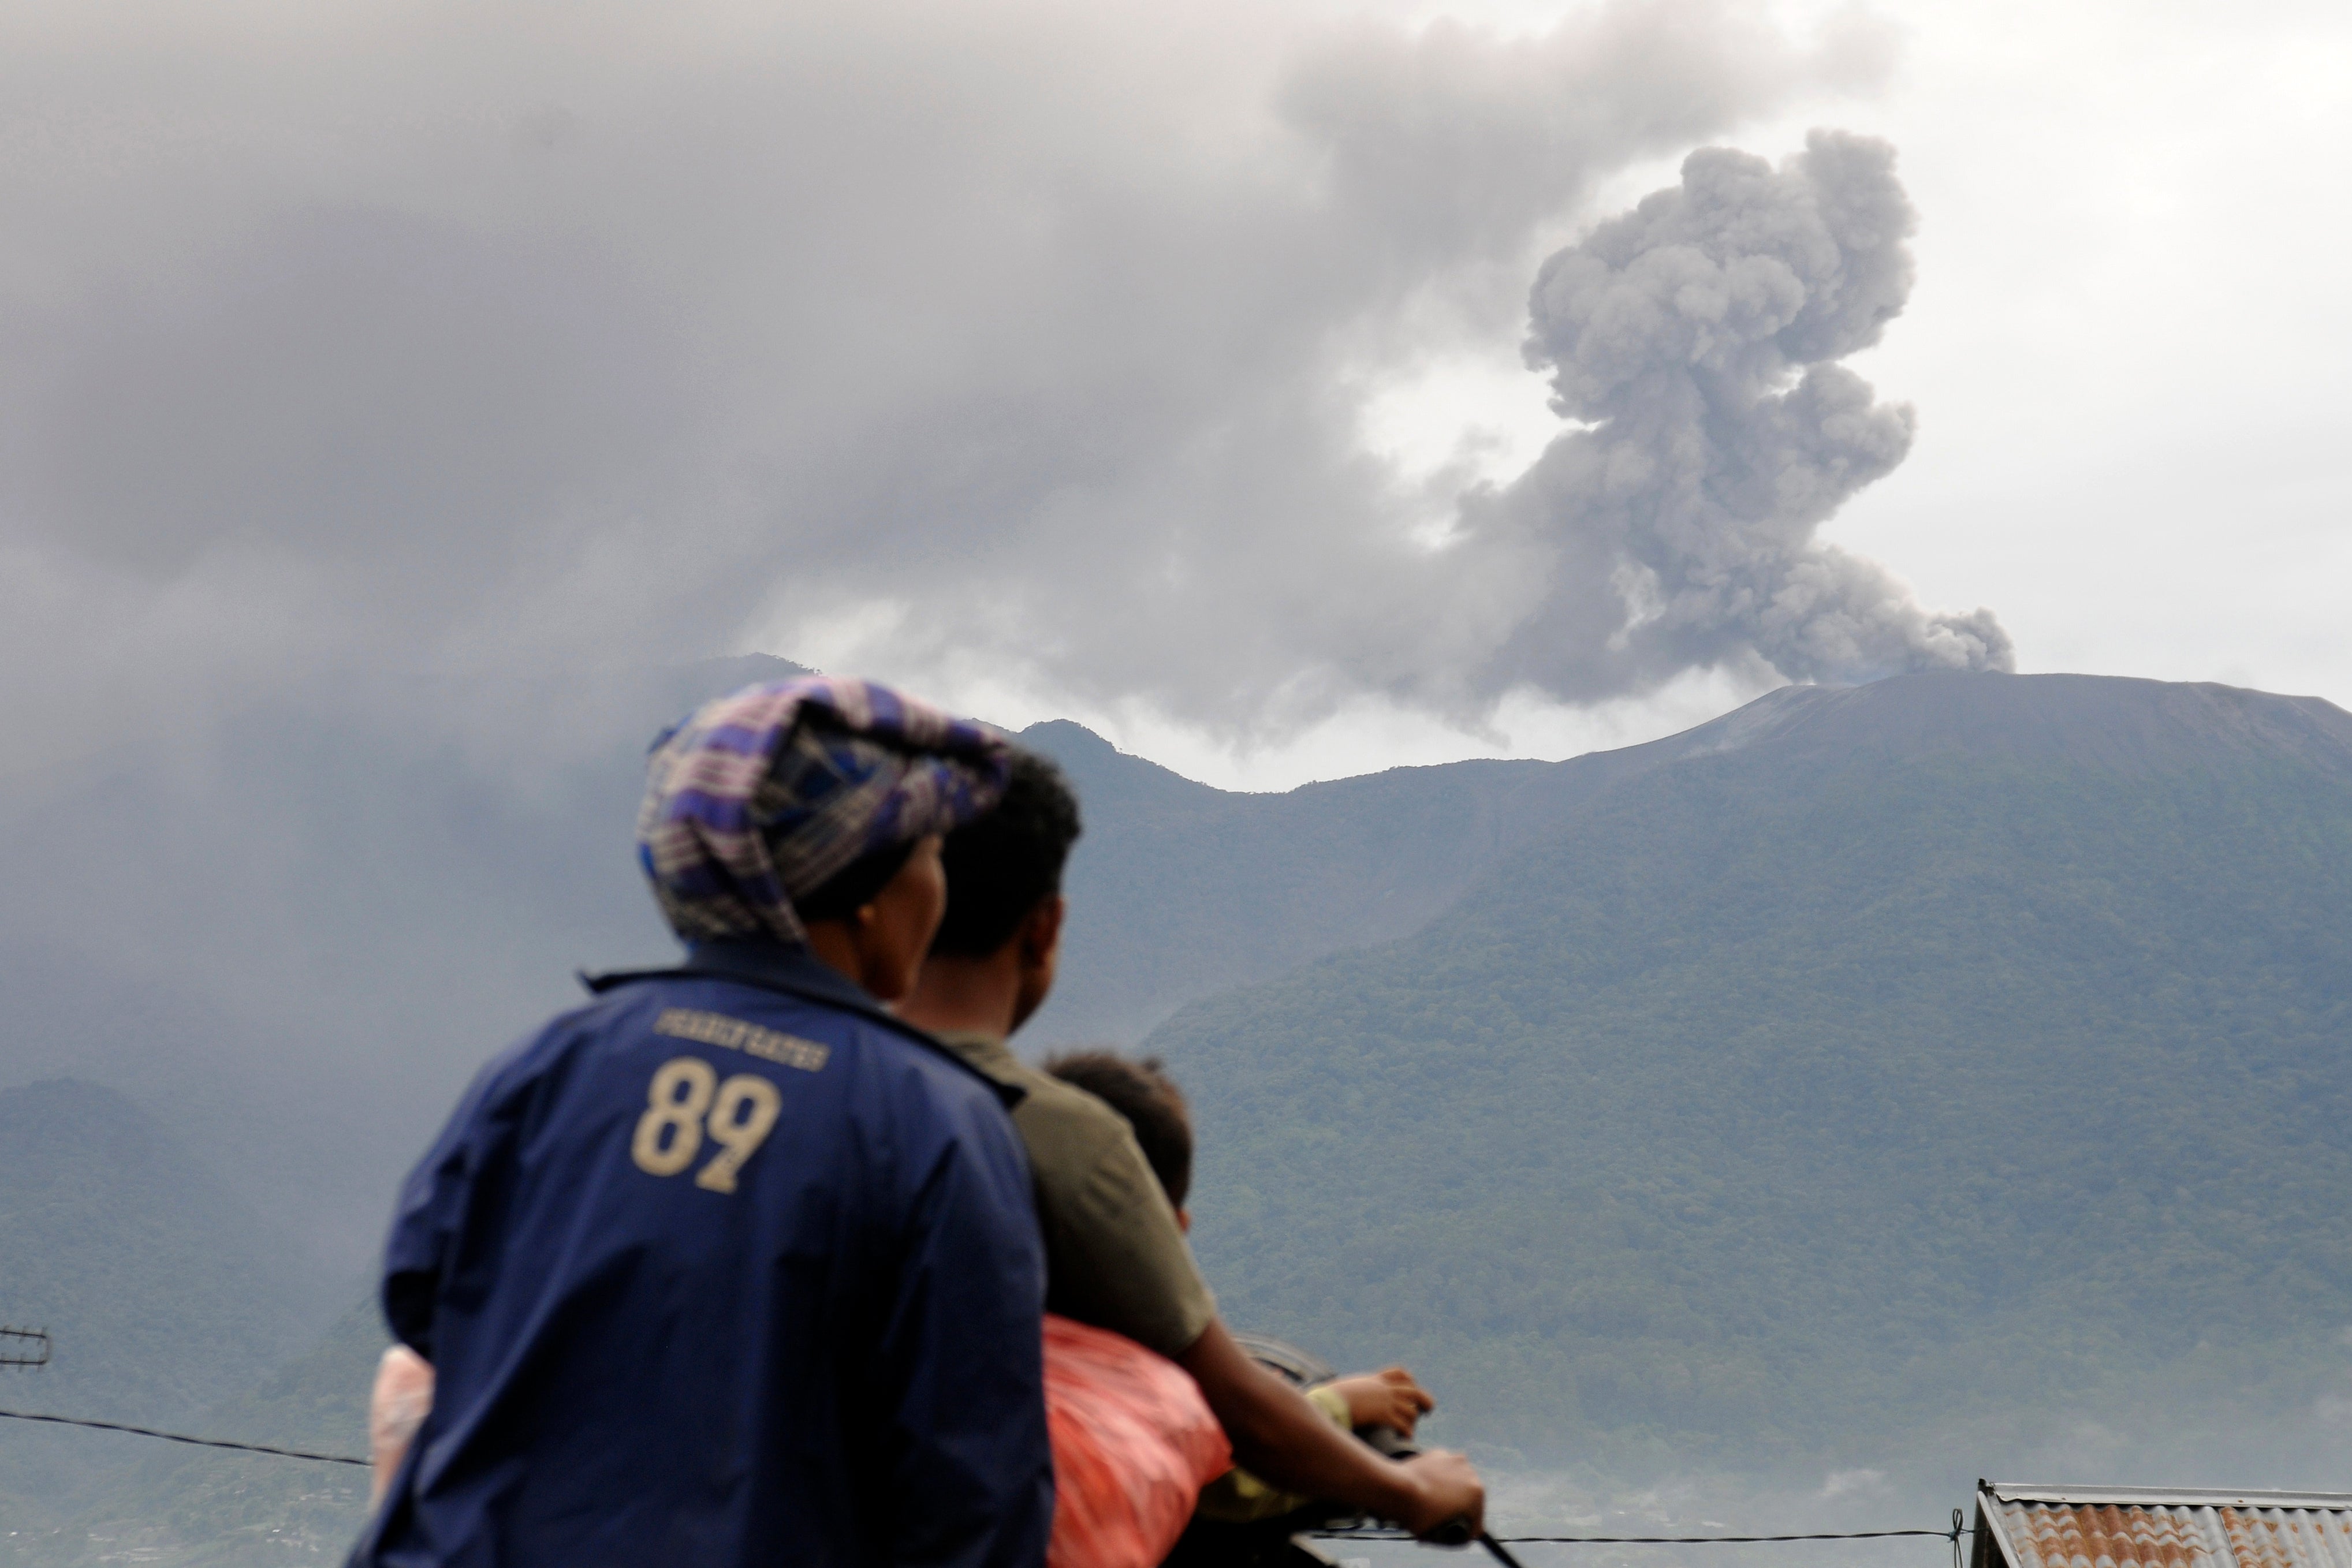 Motorists ride past by as Mount Marapi spews volcanic materials during its eruption in Agam, West Sumatra, Indonesia